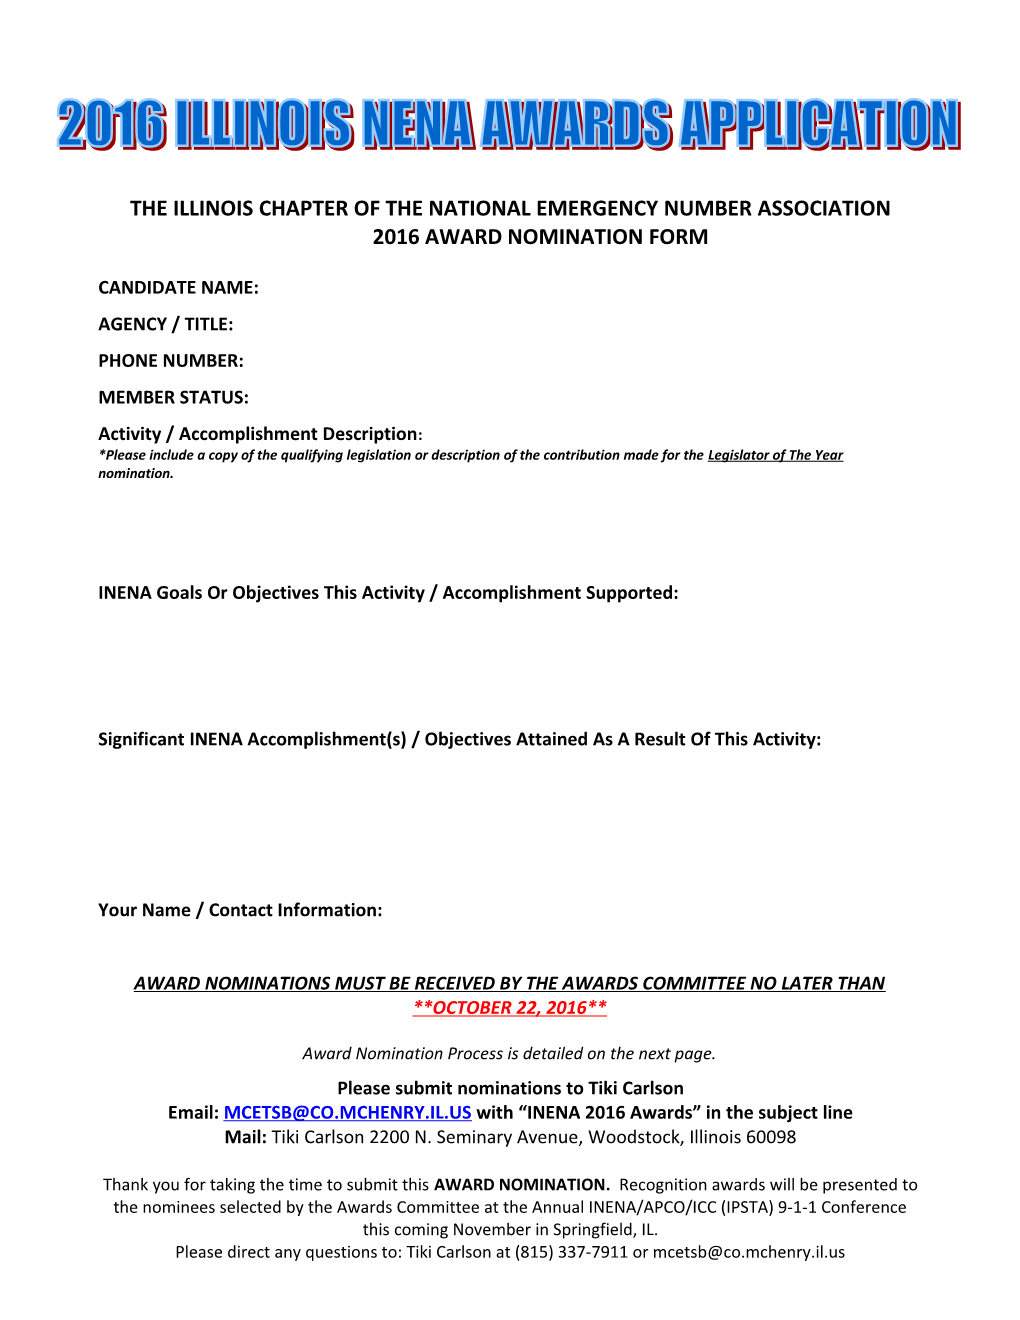 The Illinois Chapter of the National Emergency Number Association